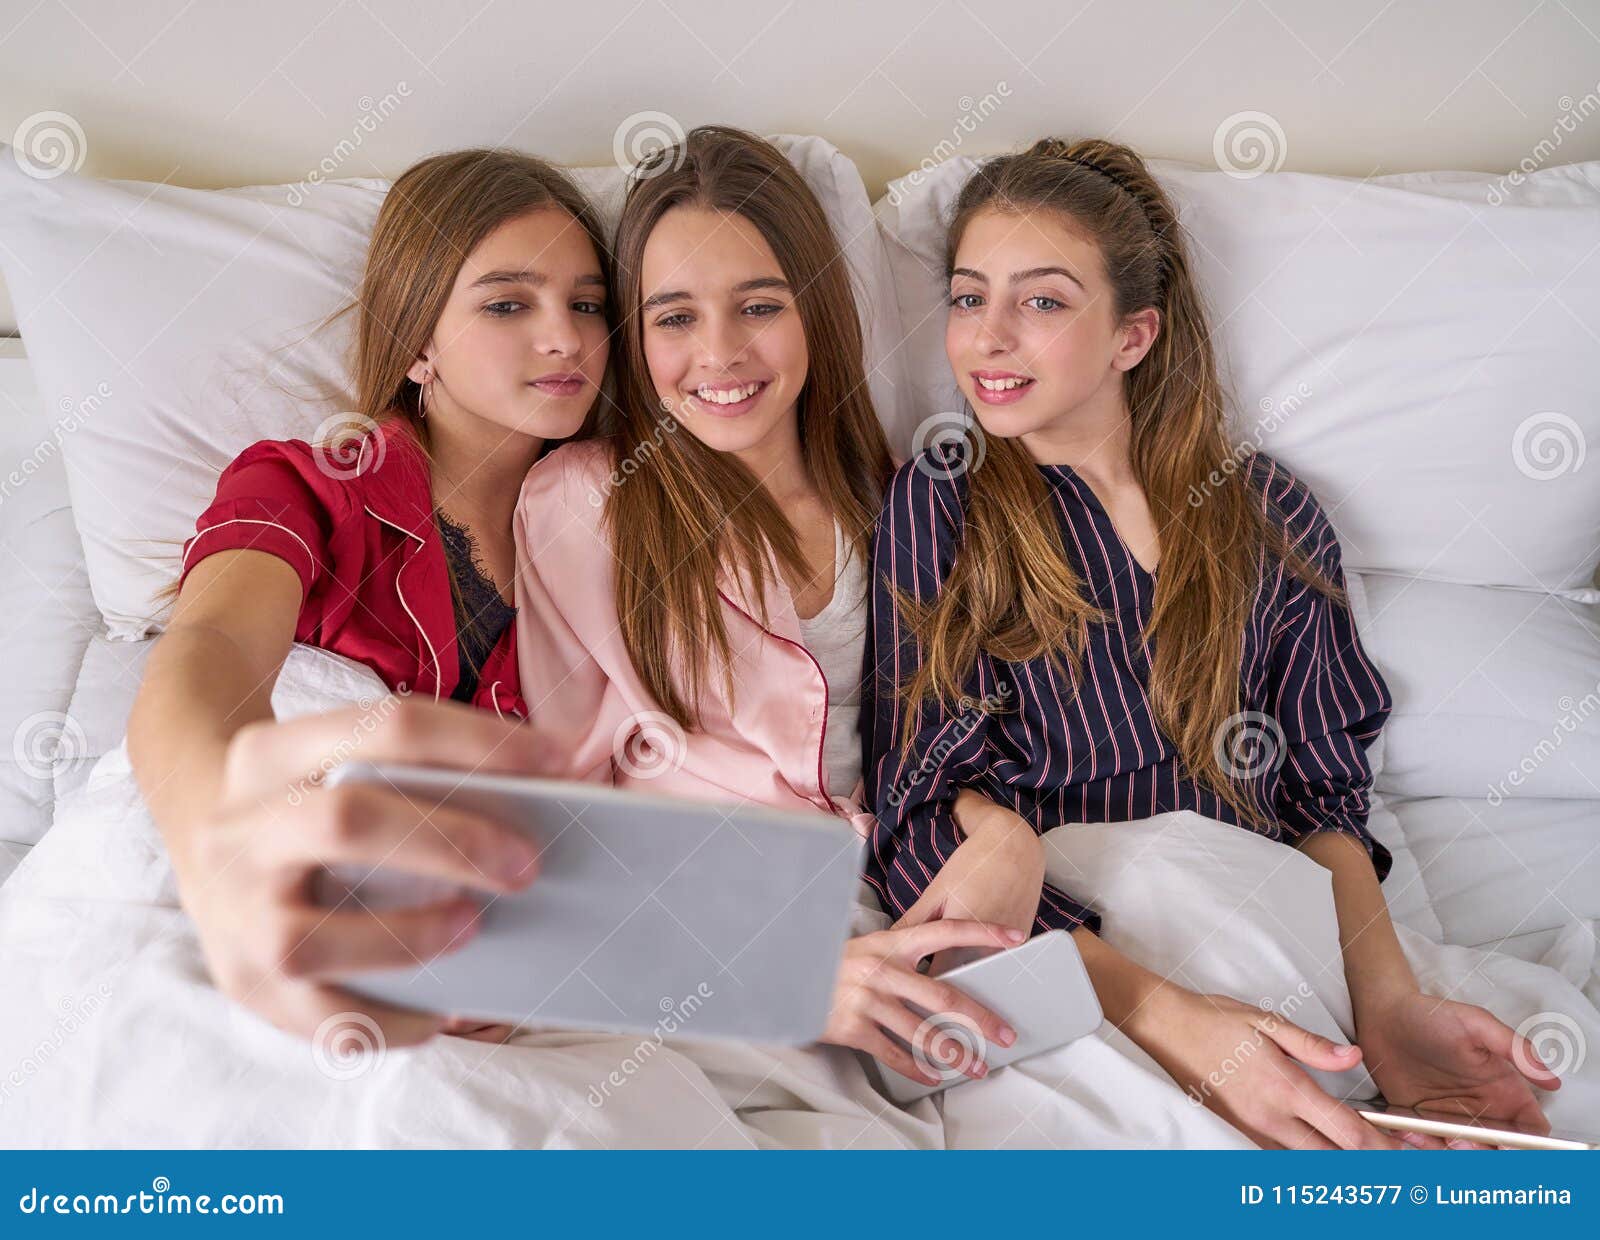 Pajama Party Best Friend Girls Selfie At Bed Stock Image Image Of